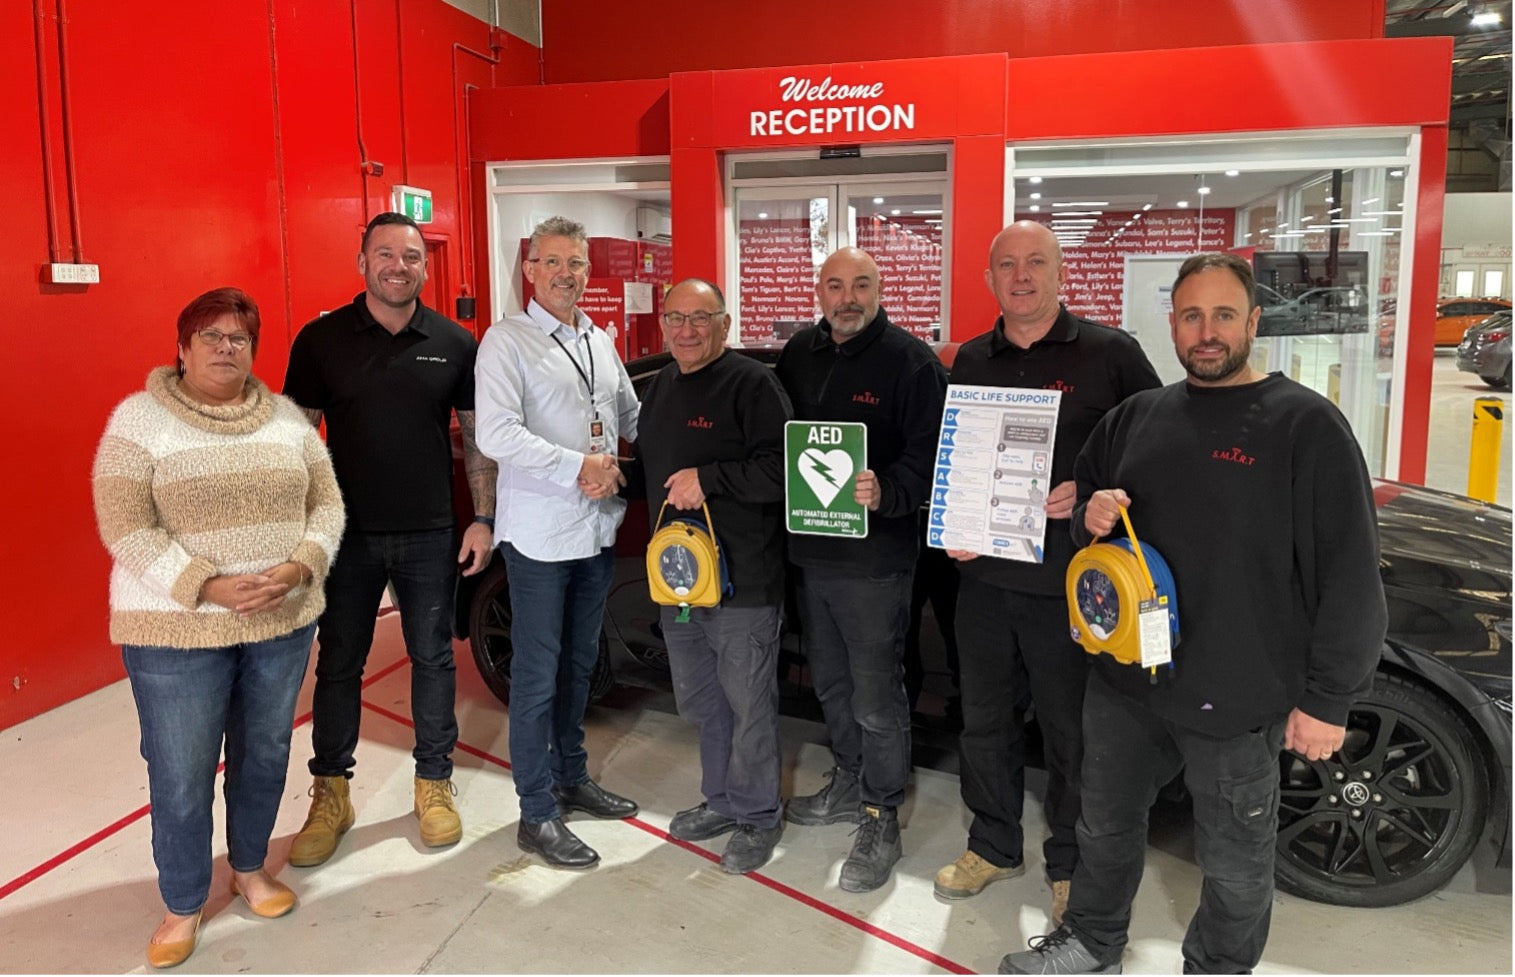 IMAGE CAPTION: The Defib for Life team at AMA Group's Capital S.M.A.R.T site in Tullamarine, Vic.  — From left to right: Sue Buckman, Defib For Life co-founder; Dean Lang, AMA Group Head of HSE; Andrew White, Defib For Life co-founder; Chris Agrov, Capita